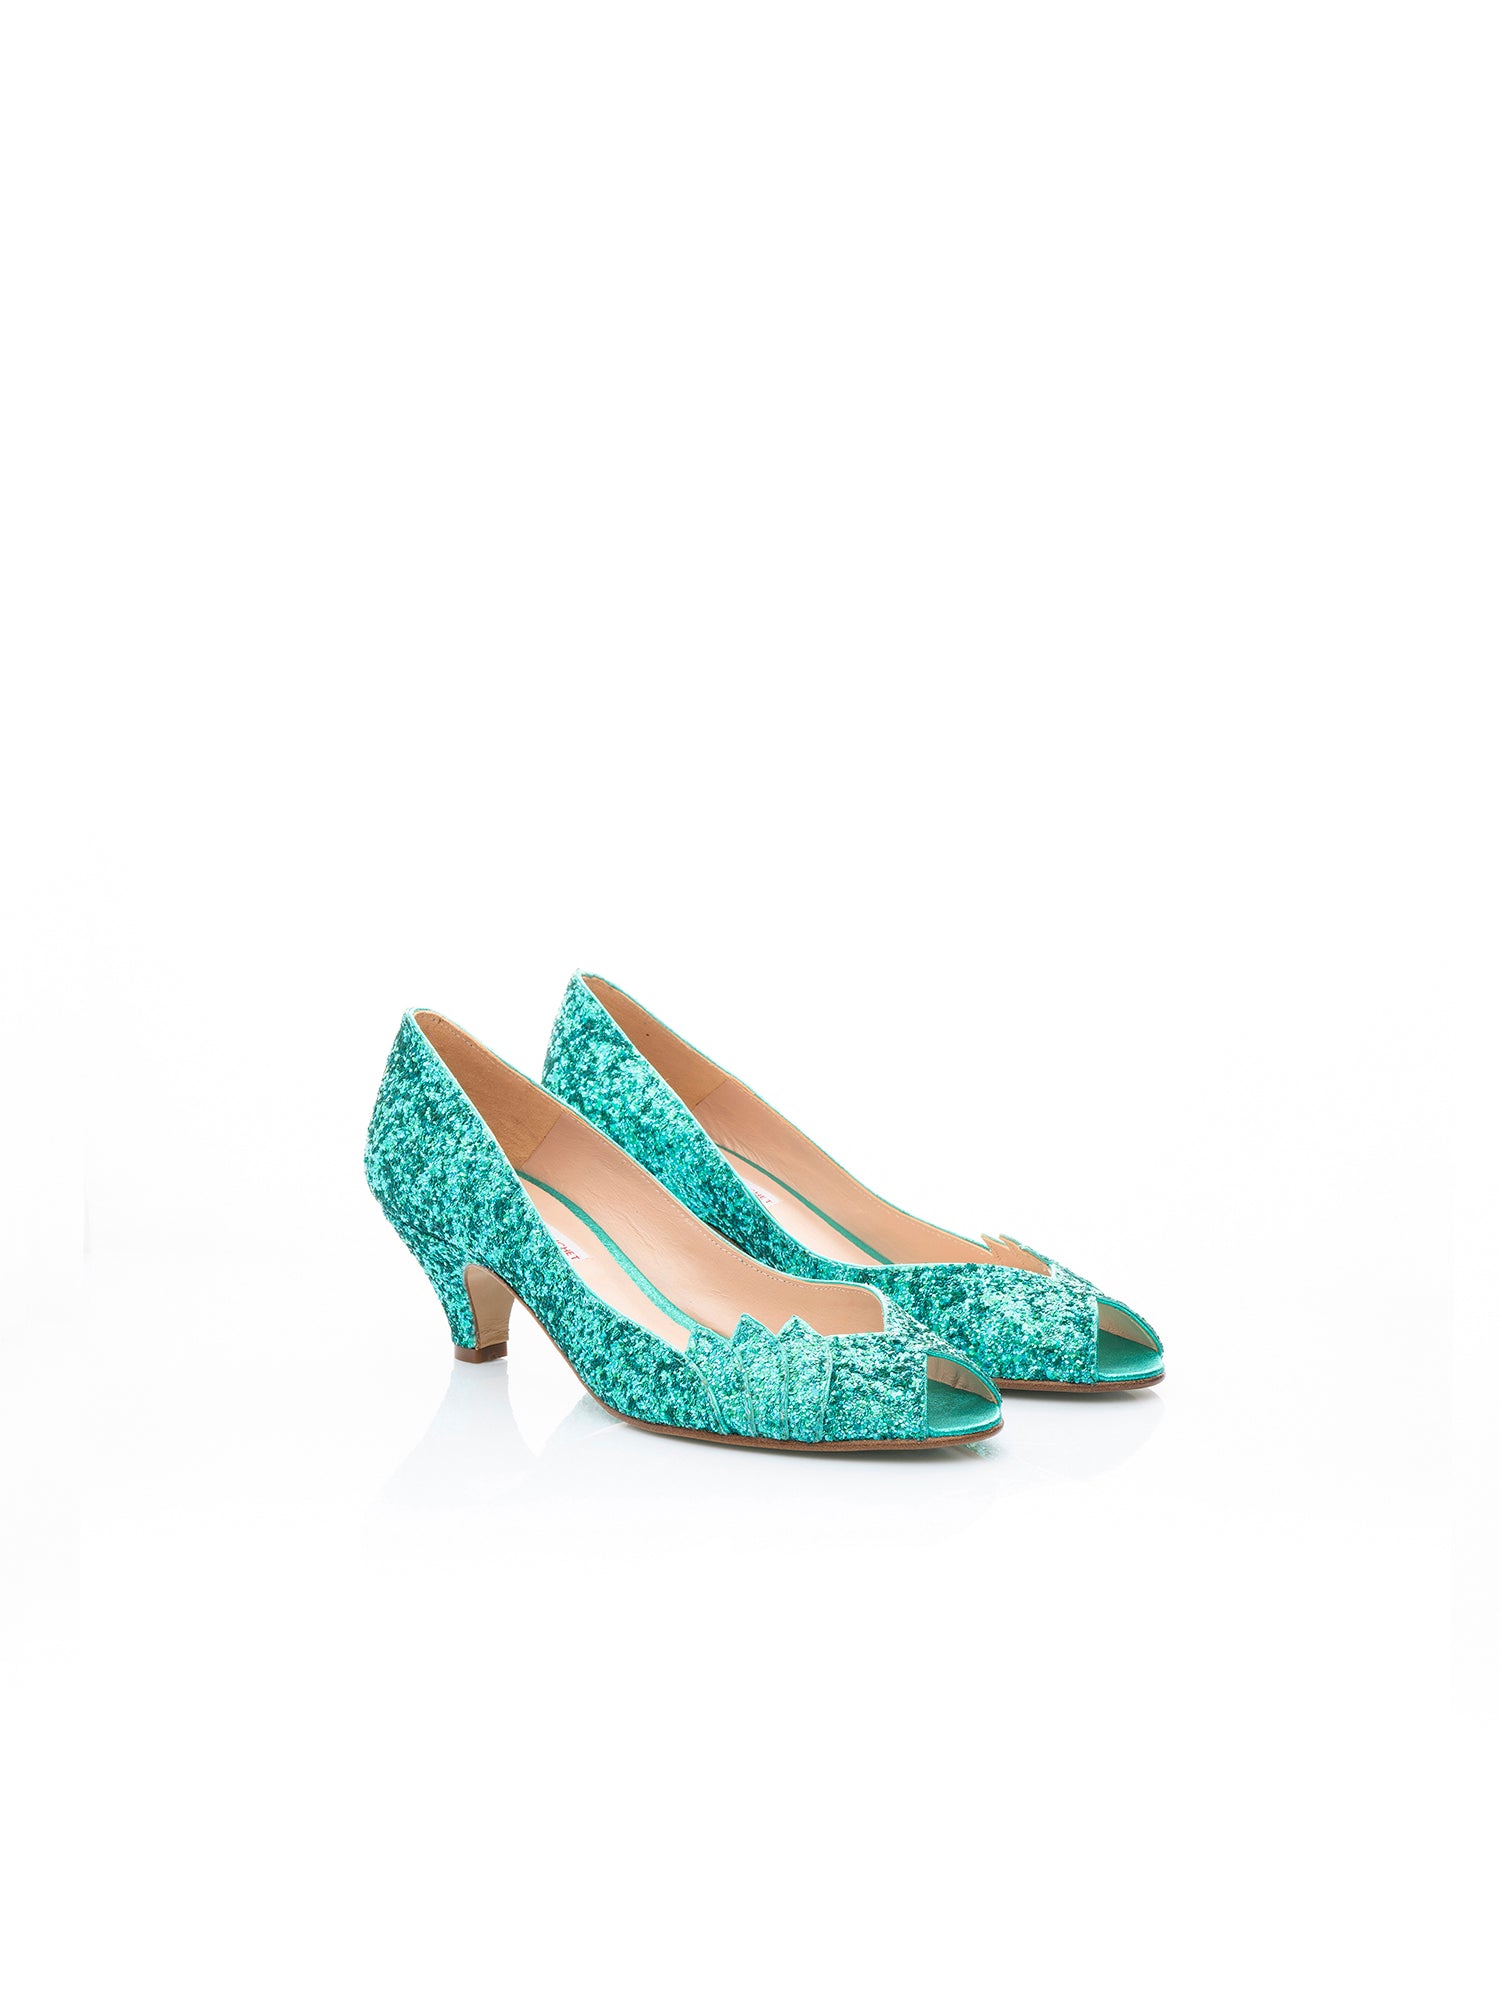 Small heel glitter turquoise pump Cocotte - Patricia Blanchet